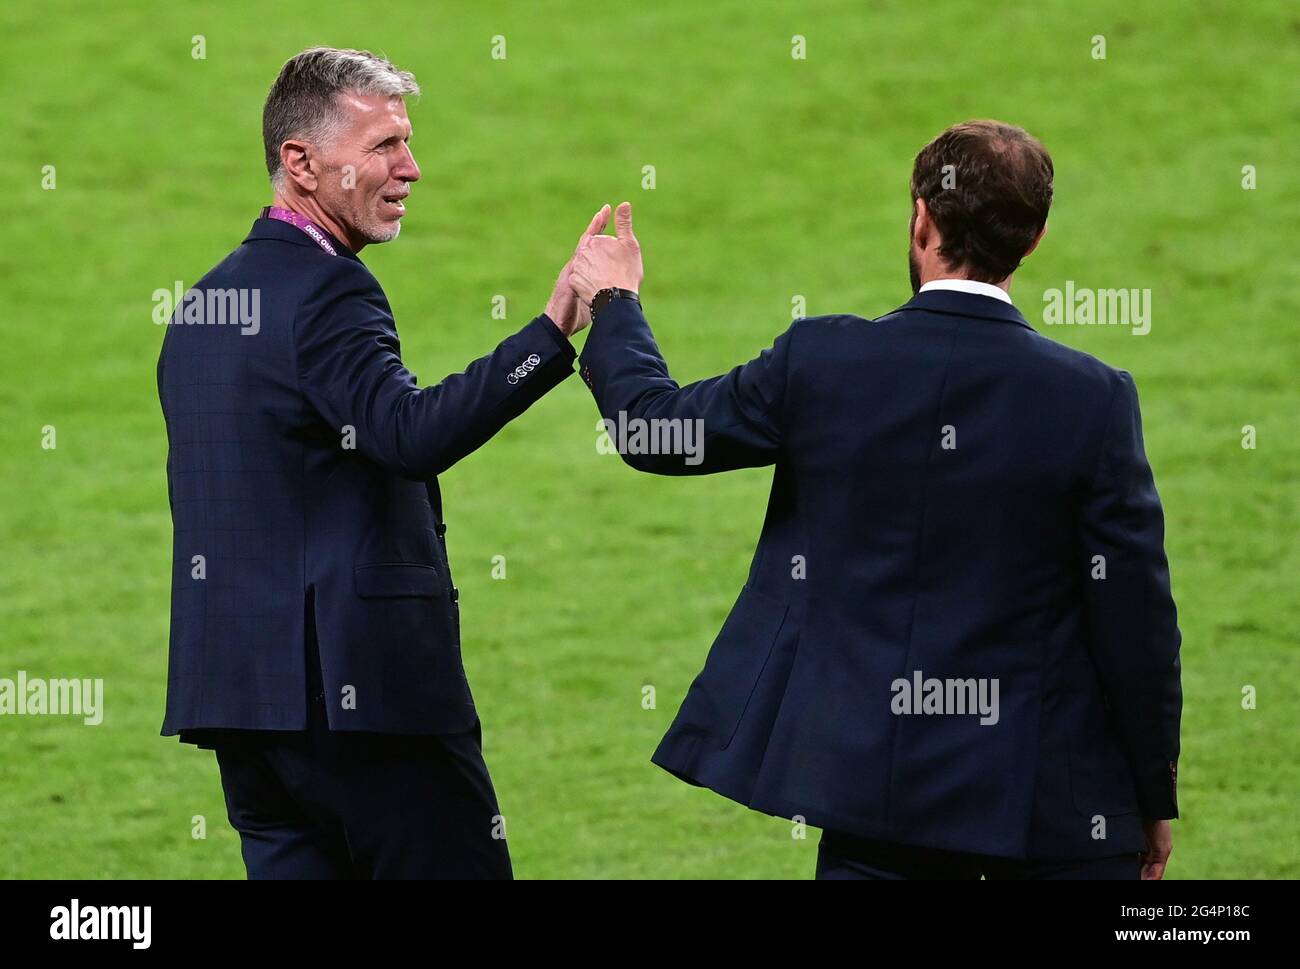 Soccer Football - Euro 2020 - Group D - Czech Republic v England - Wembley Stadium, London, Britain - June 22, 2021 Czech Republic coach Jaroslav Silhavy shakes hands with England manager Gareth Southgate after the match Pool via REUTERS/Neil Hall Stock Photo